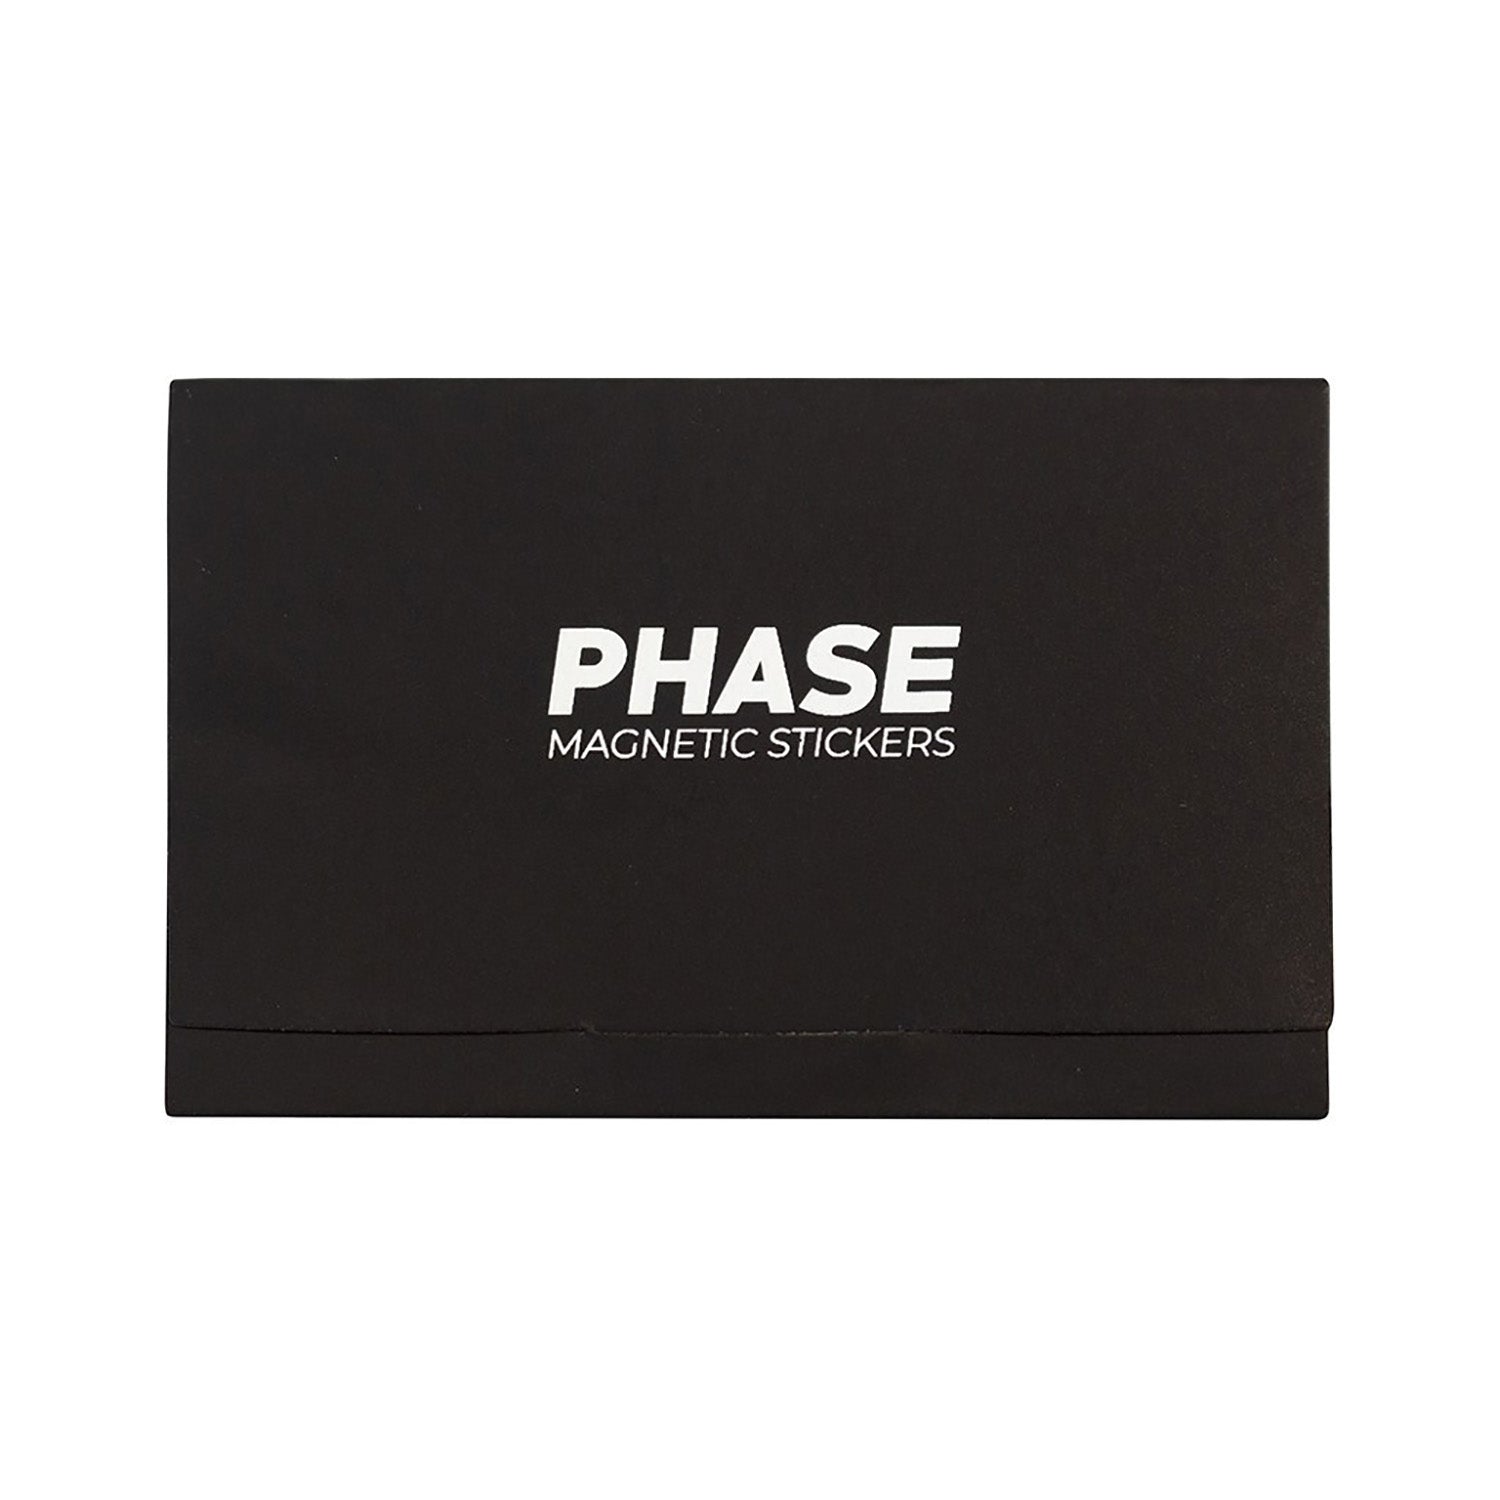 Phase DJ PHASE-STICKER Magnetic Phase Stickers For Remotes - 4 Pack - Hollywood DJ